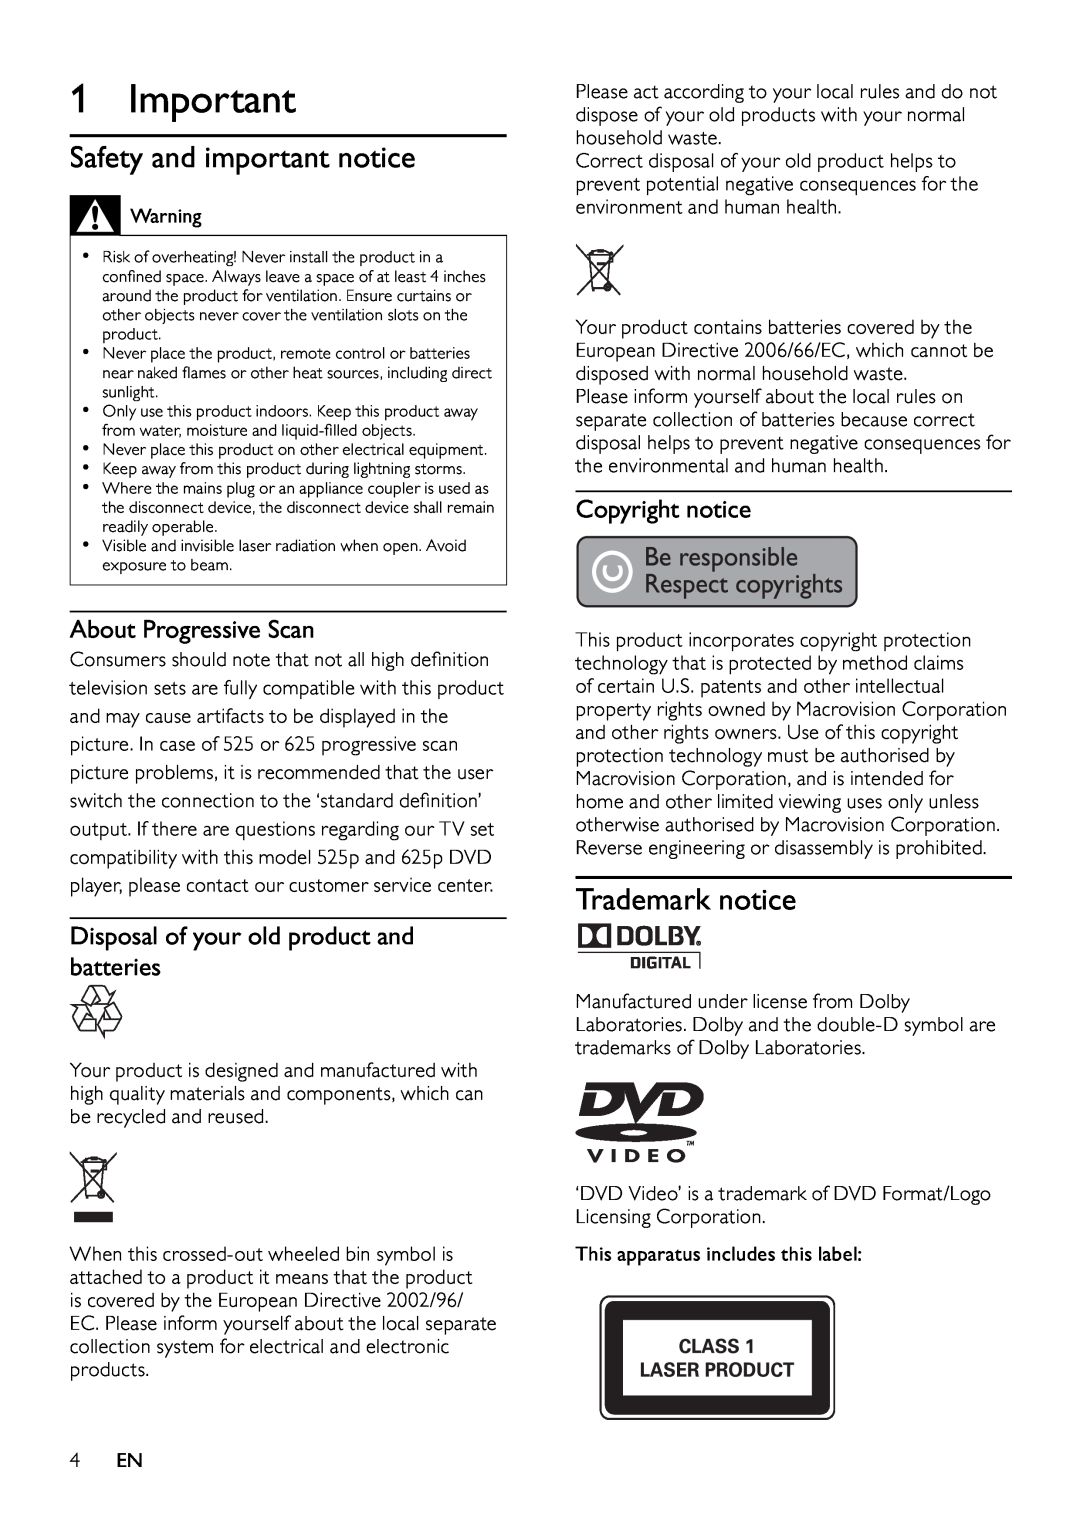 Philips DVP3100/79 Important, Safety and important notice, Trademark notice, Copyright notice, About Progressive Scan 